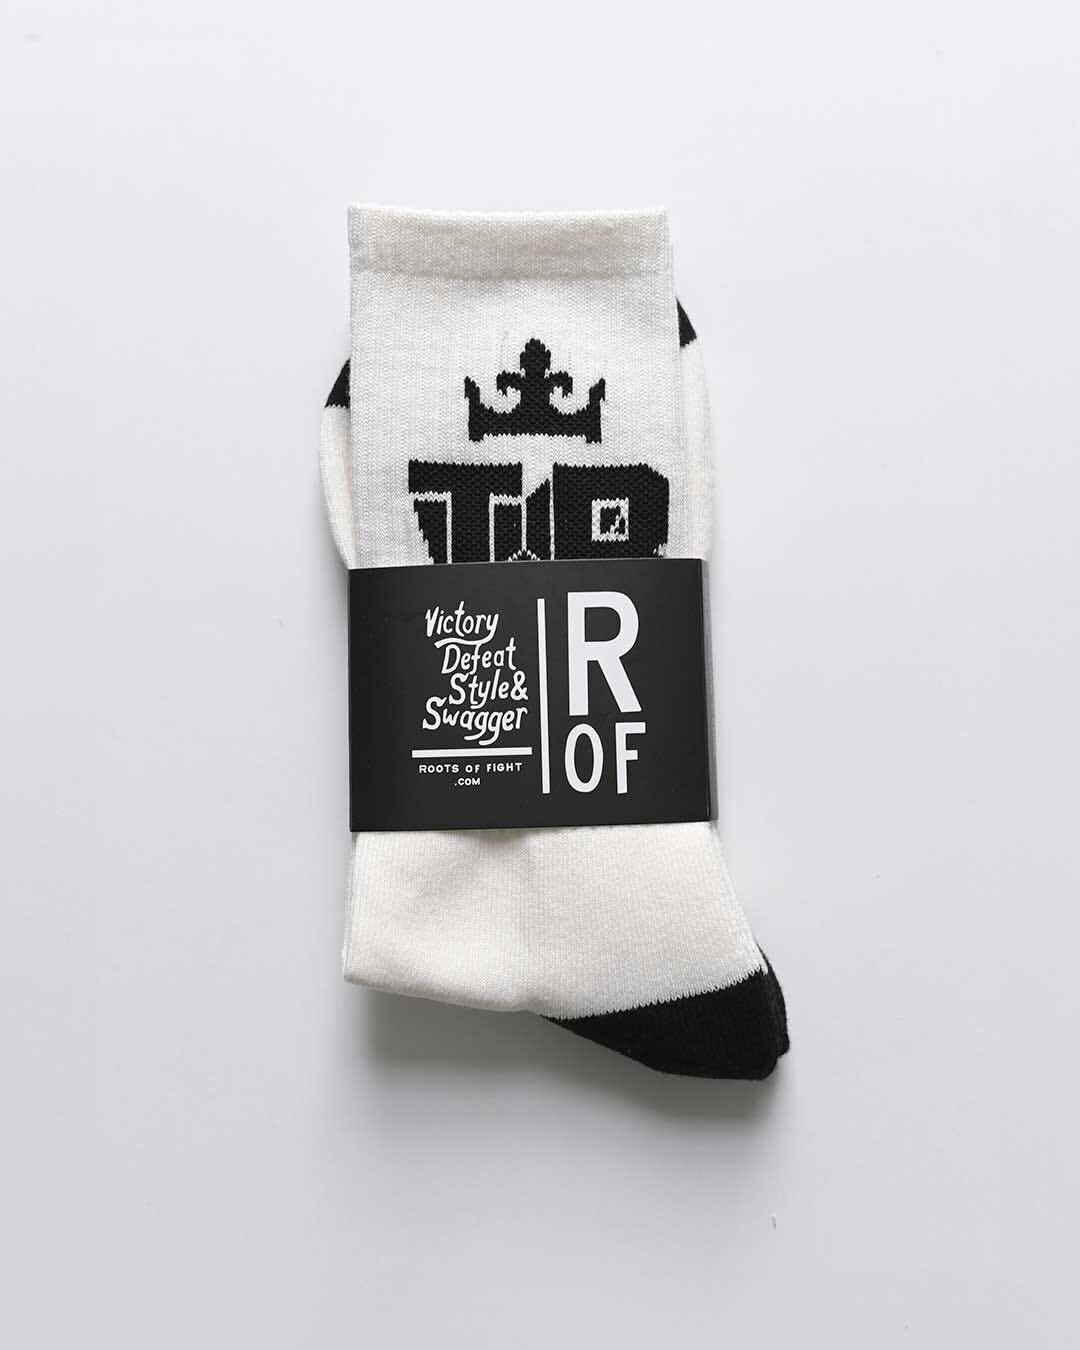 James Brown Crown Socks - Roots of Fight Canada